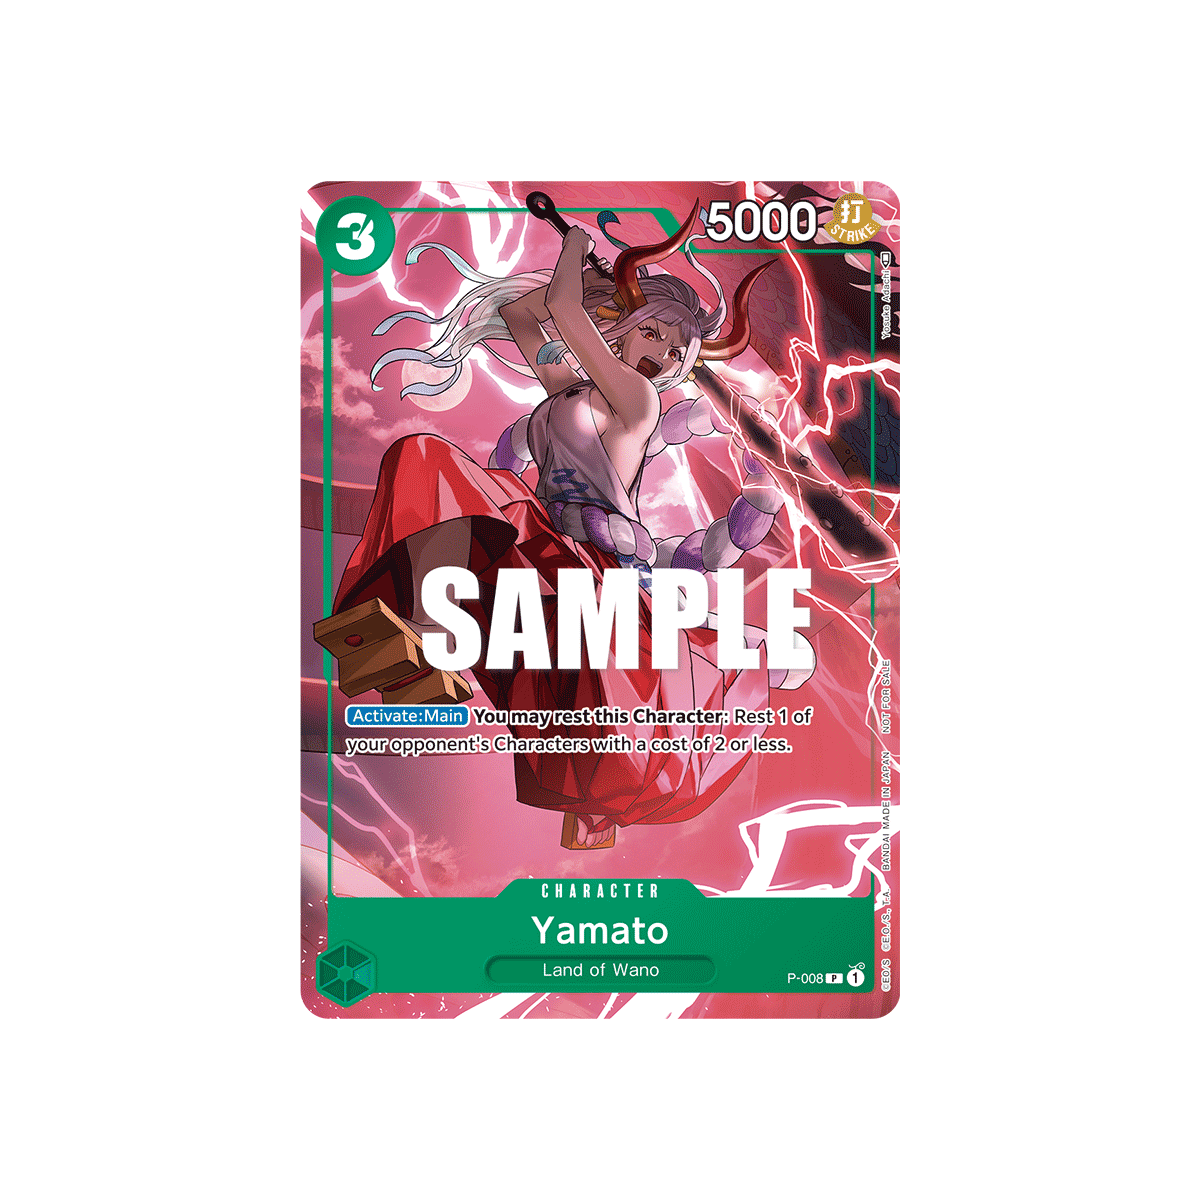 Yamato: Carte One Piece Tournament Pack Vol.1 N°P-008